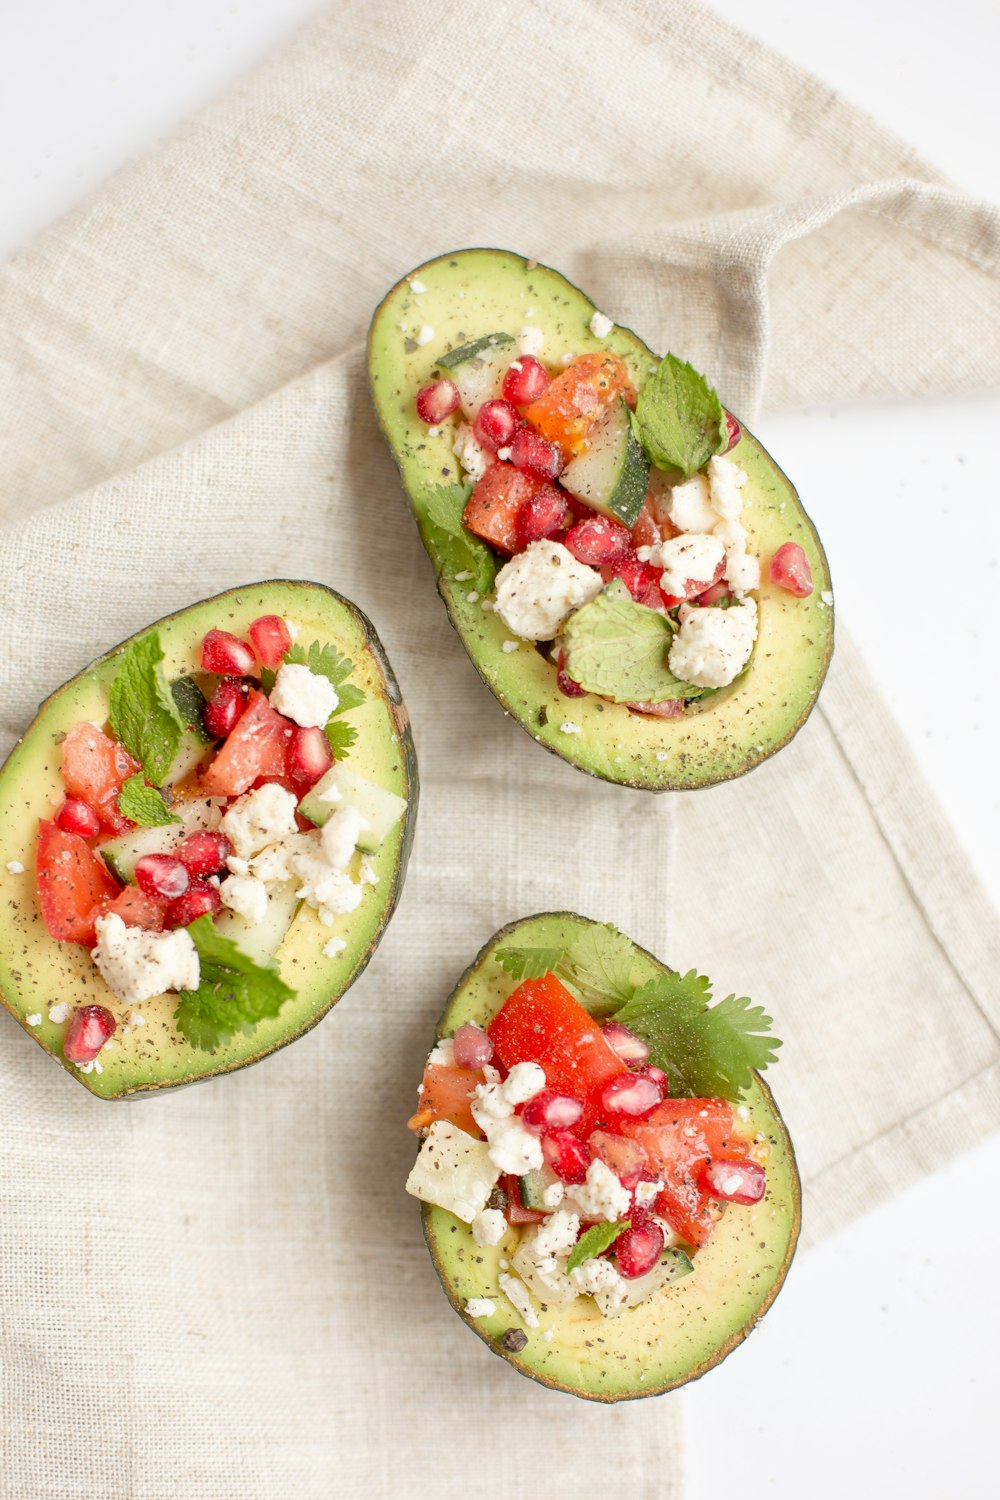 These are some of the most popular avocado recipes. From avocado recipes salad to avocado recipes for weight loss. These healthy avocado recipes include avocado recipes breakfast and avocado recipes dessert. There are also avocado recipes for babies and avocado recipes for pregnant women. Many avocado recipes names are hot avocado recipes. three avocado fruit desserts.